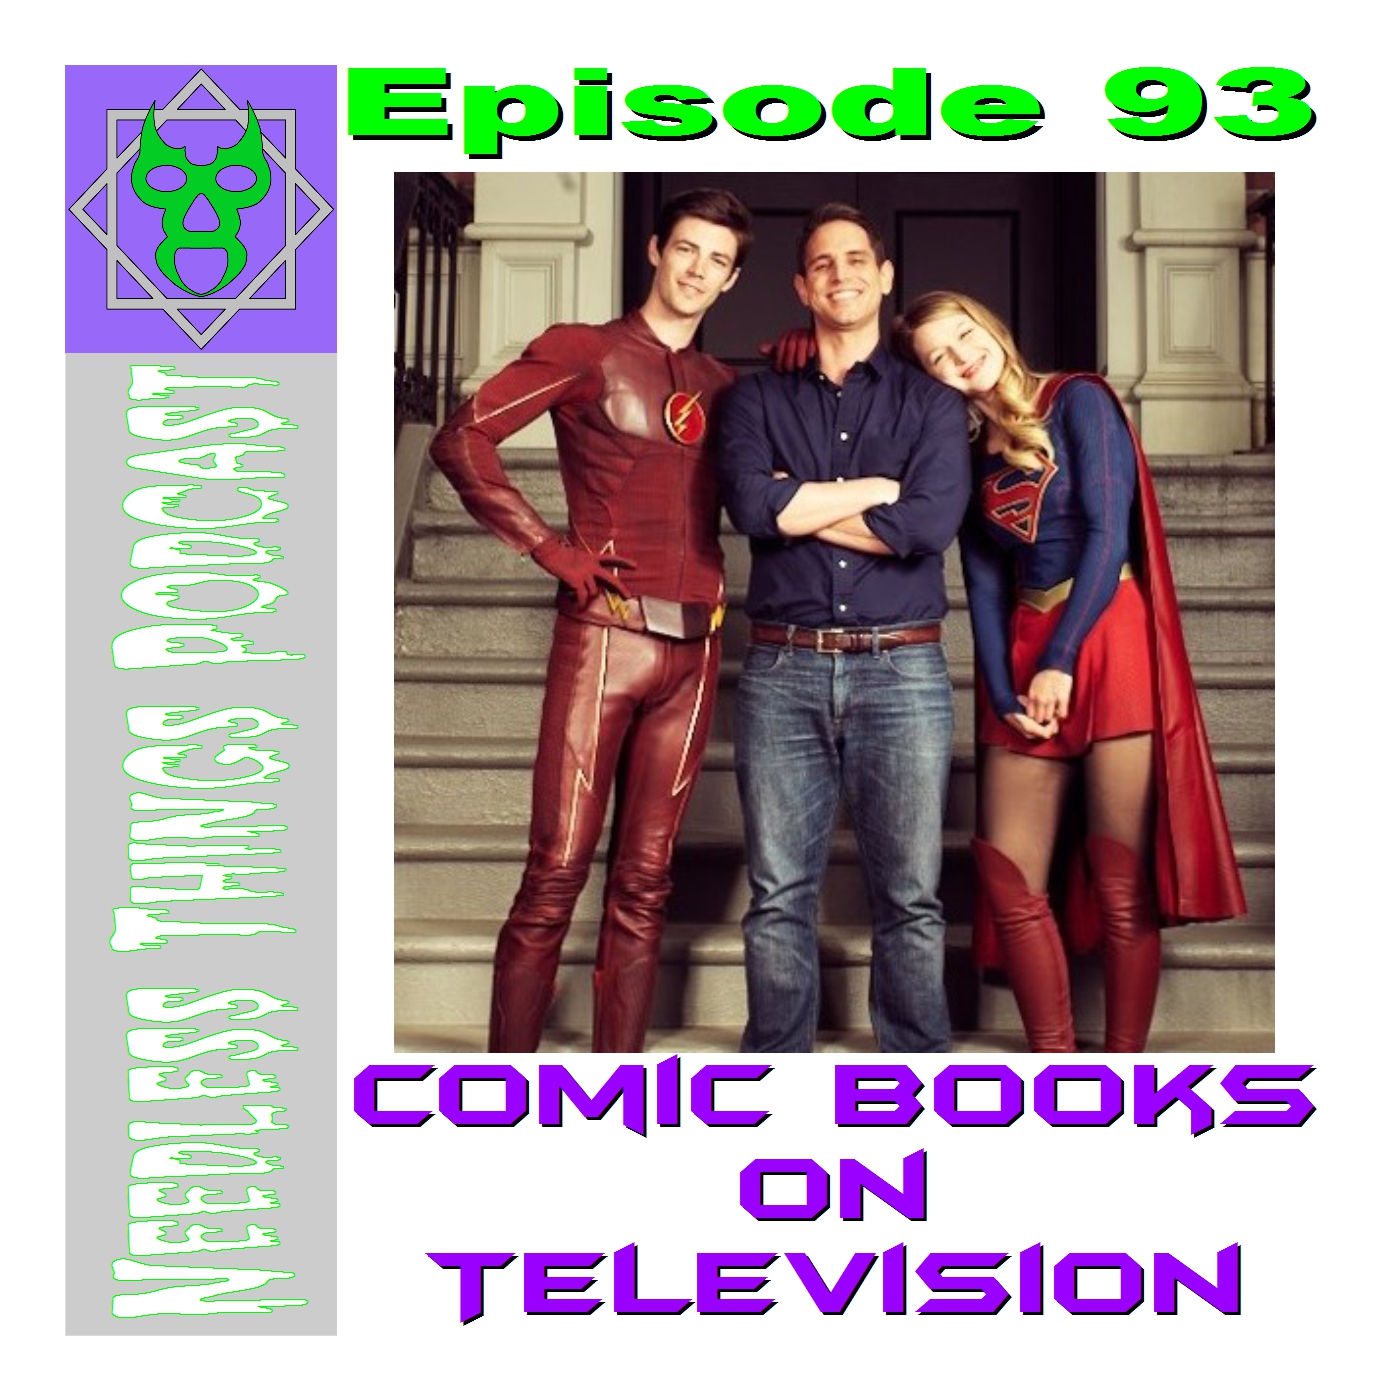 Needless Things Podcast 93 – Comic Books on TV